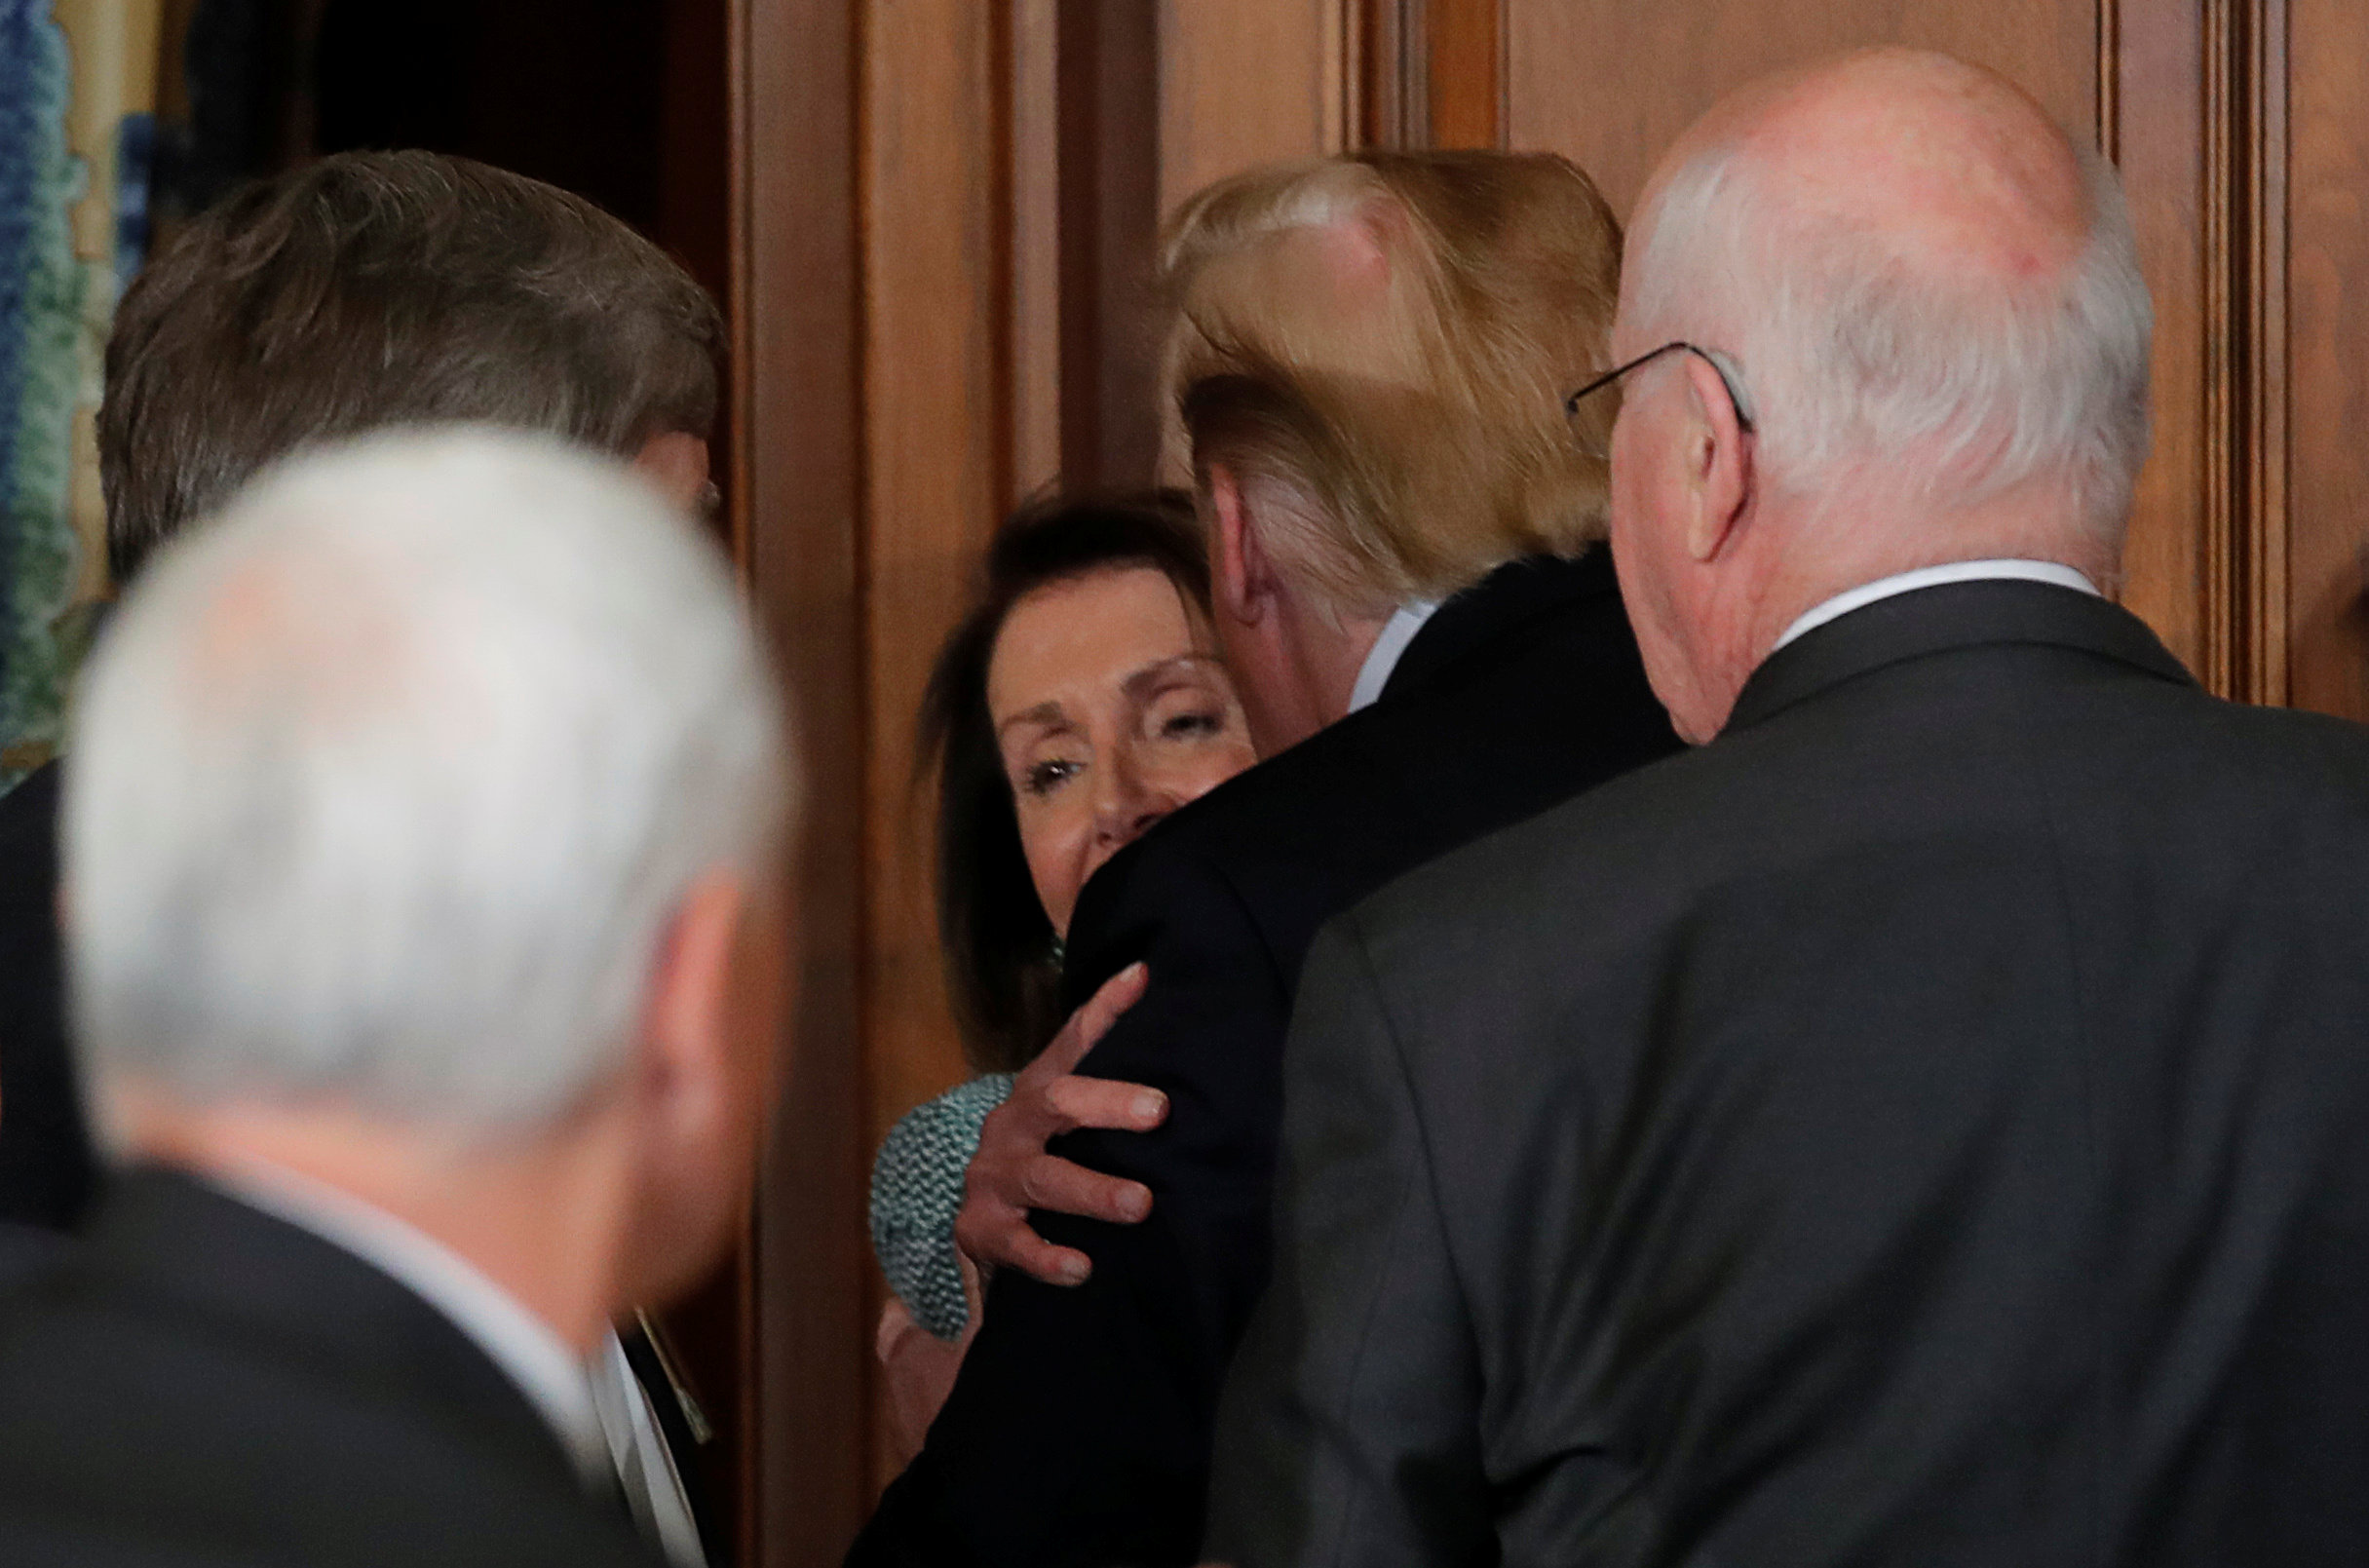 PHOTO: Speaker of the House Nancy Pelosi is hugged and kissed by President Donald Trump at the 37th annual Friends of Ireland luncheon at the U.S. Capitol in Washington, March 14, 2019.